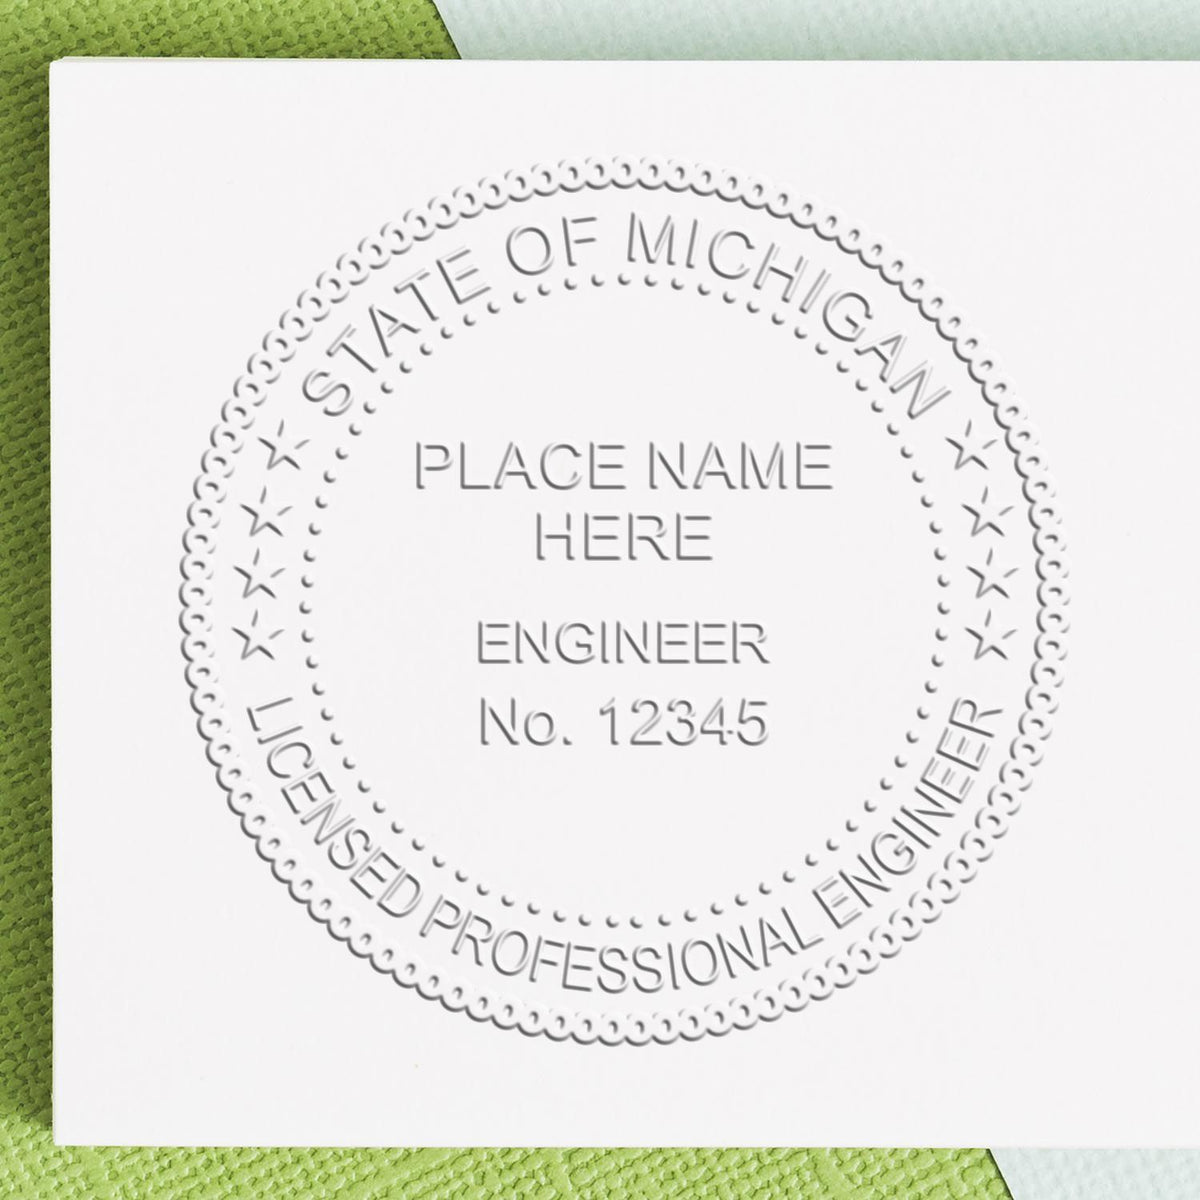 The Heavy Duty Cast Iron Michigan Engineer Seal Embosser stamp impression comes to life with a crisp, detailed photo on paper - showcasing true professional quality.